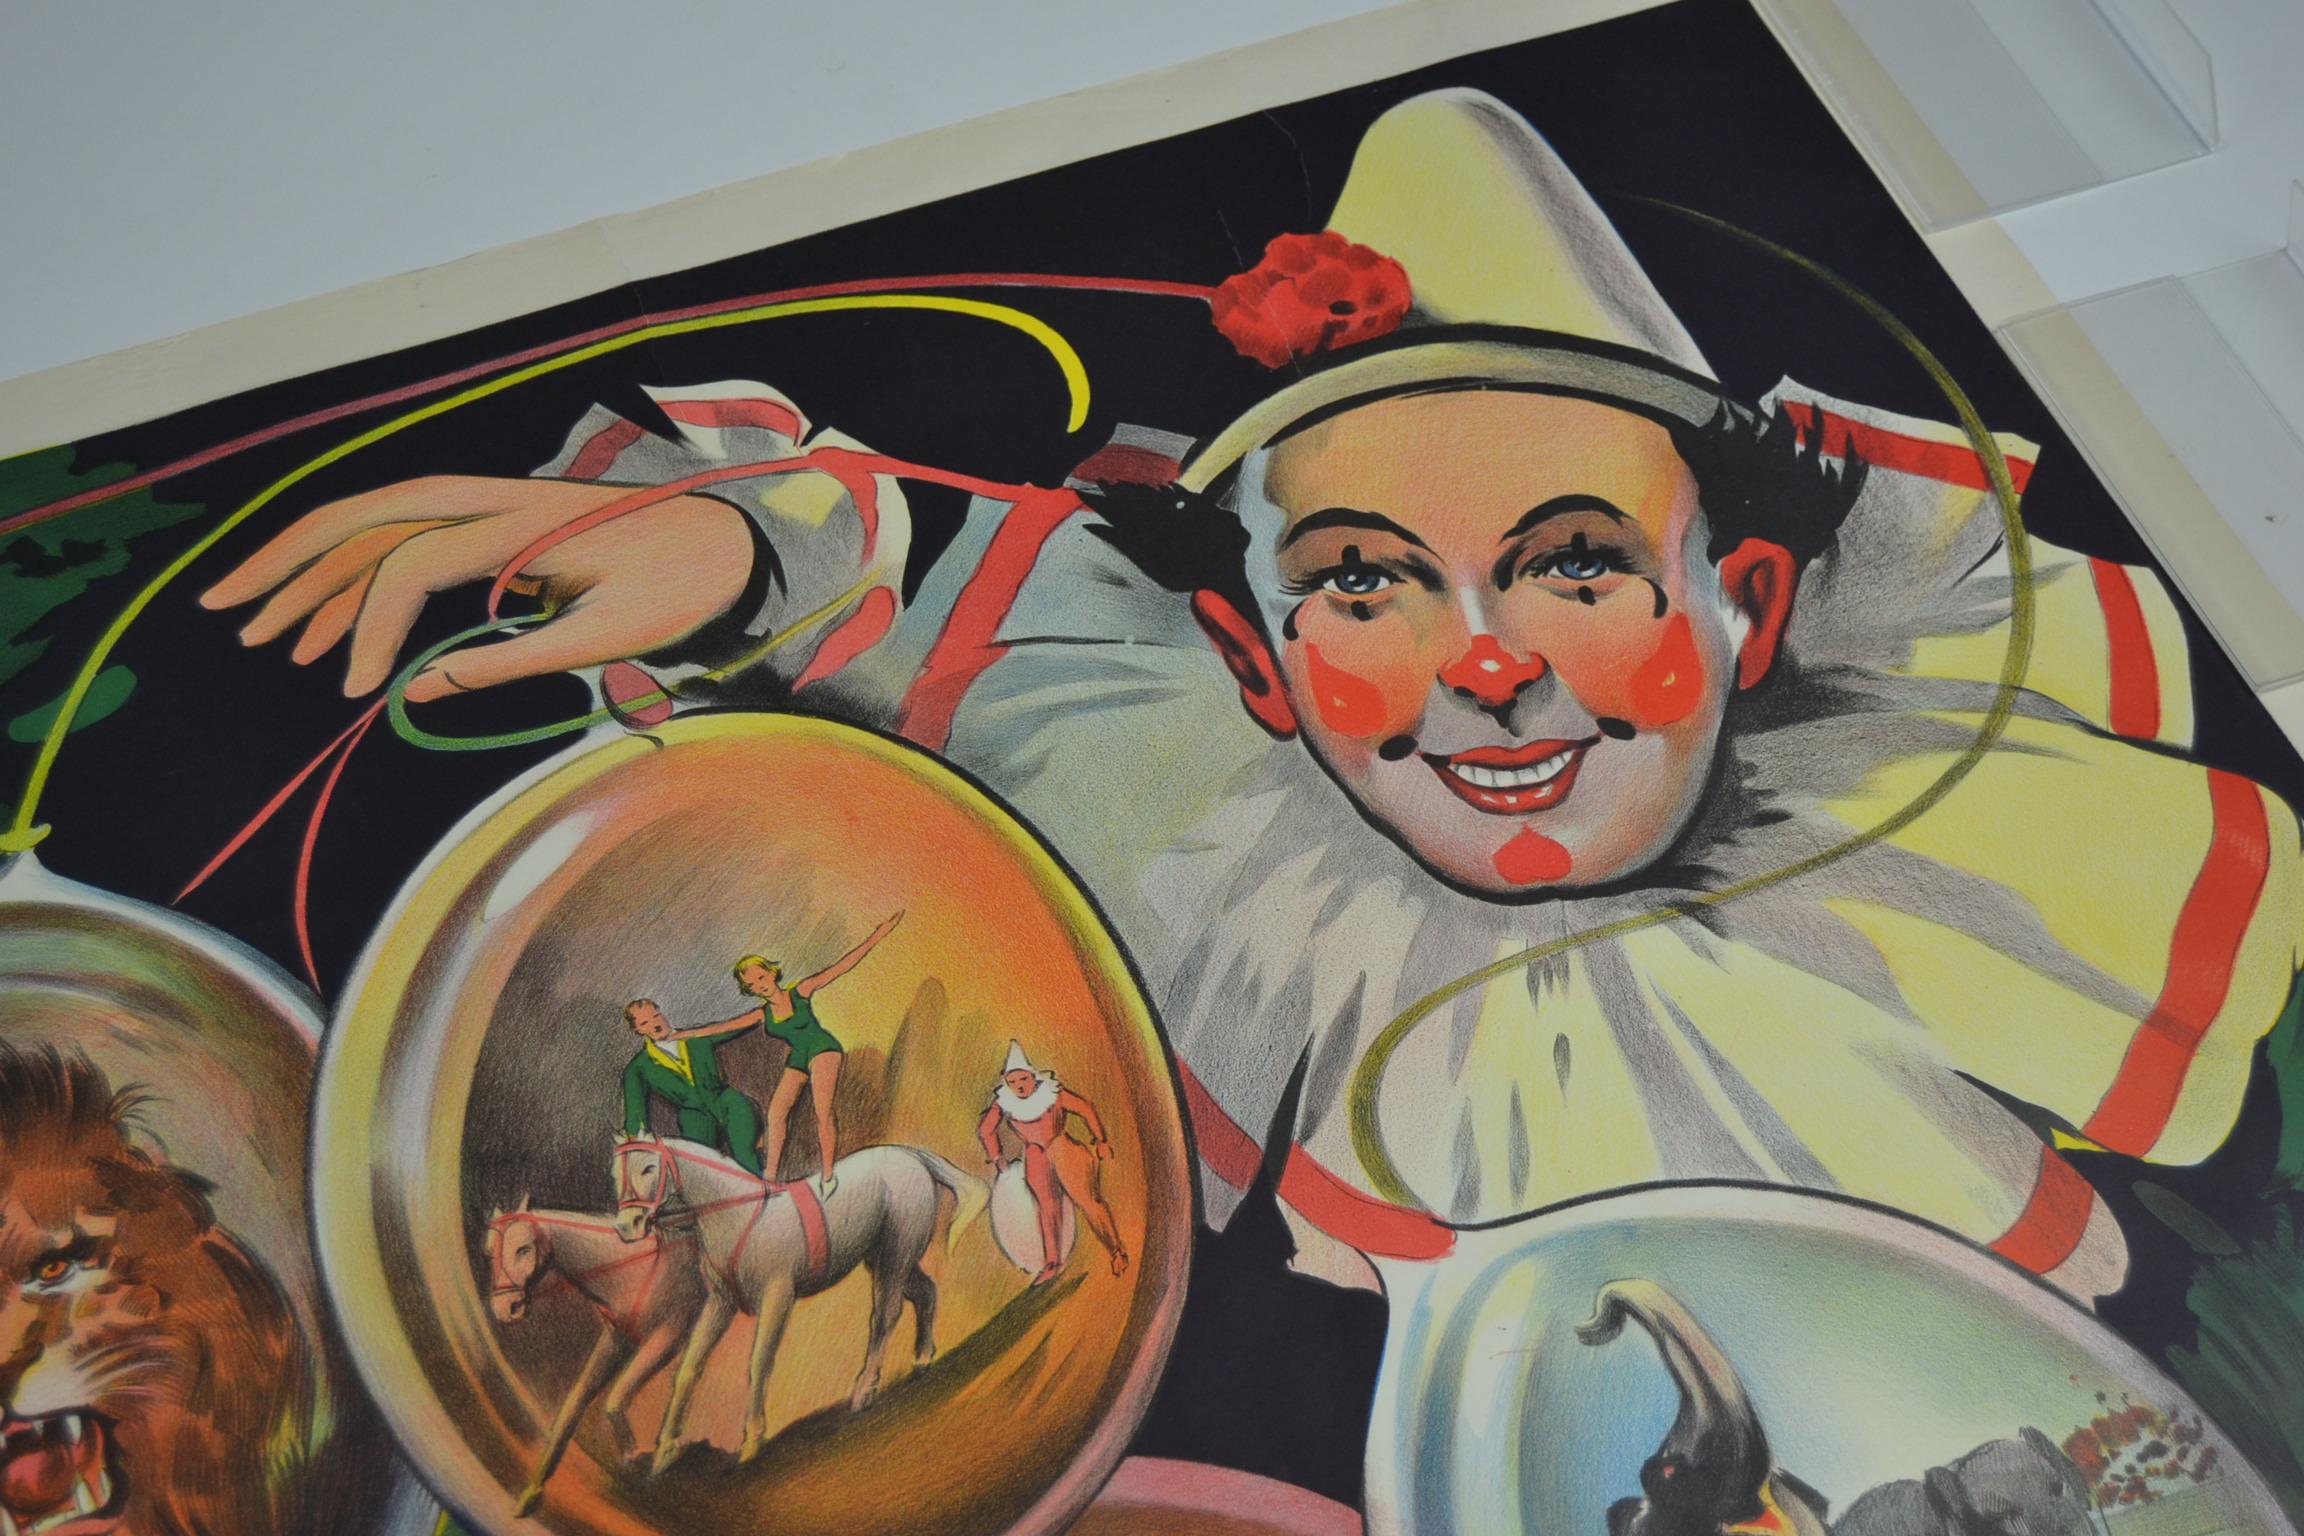 Great looking Colorful Art Deco Lithographic Circus Poster - Circus Affiche 
printed by Willsons Show Printers Leicester ( England - UK ). 
Beautiful design and use of colors. 

This lithographic circus poster presents a large smiling Clown or